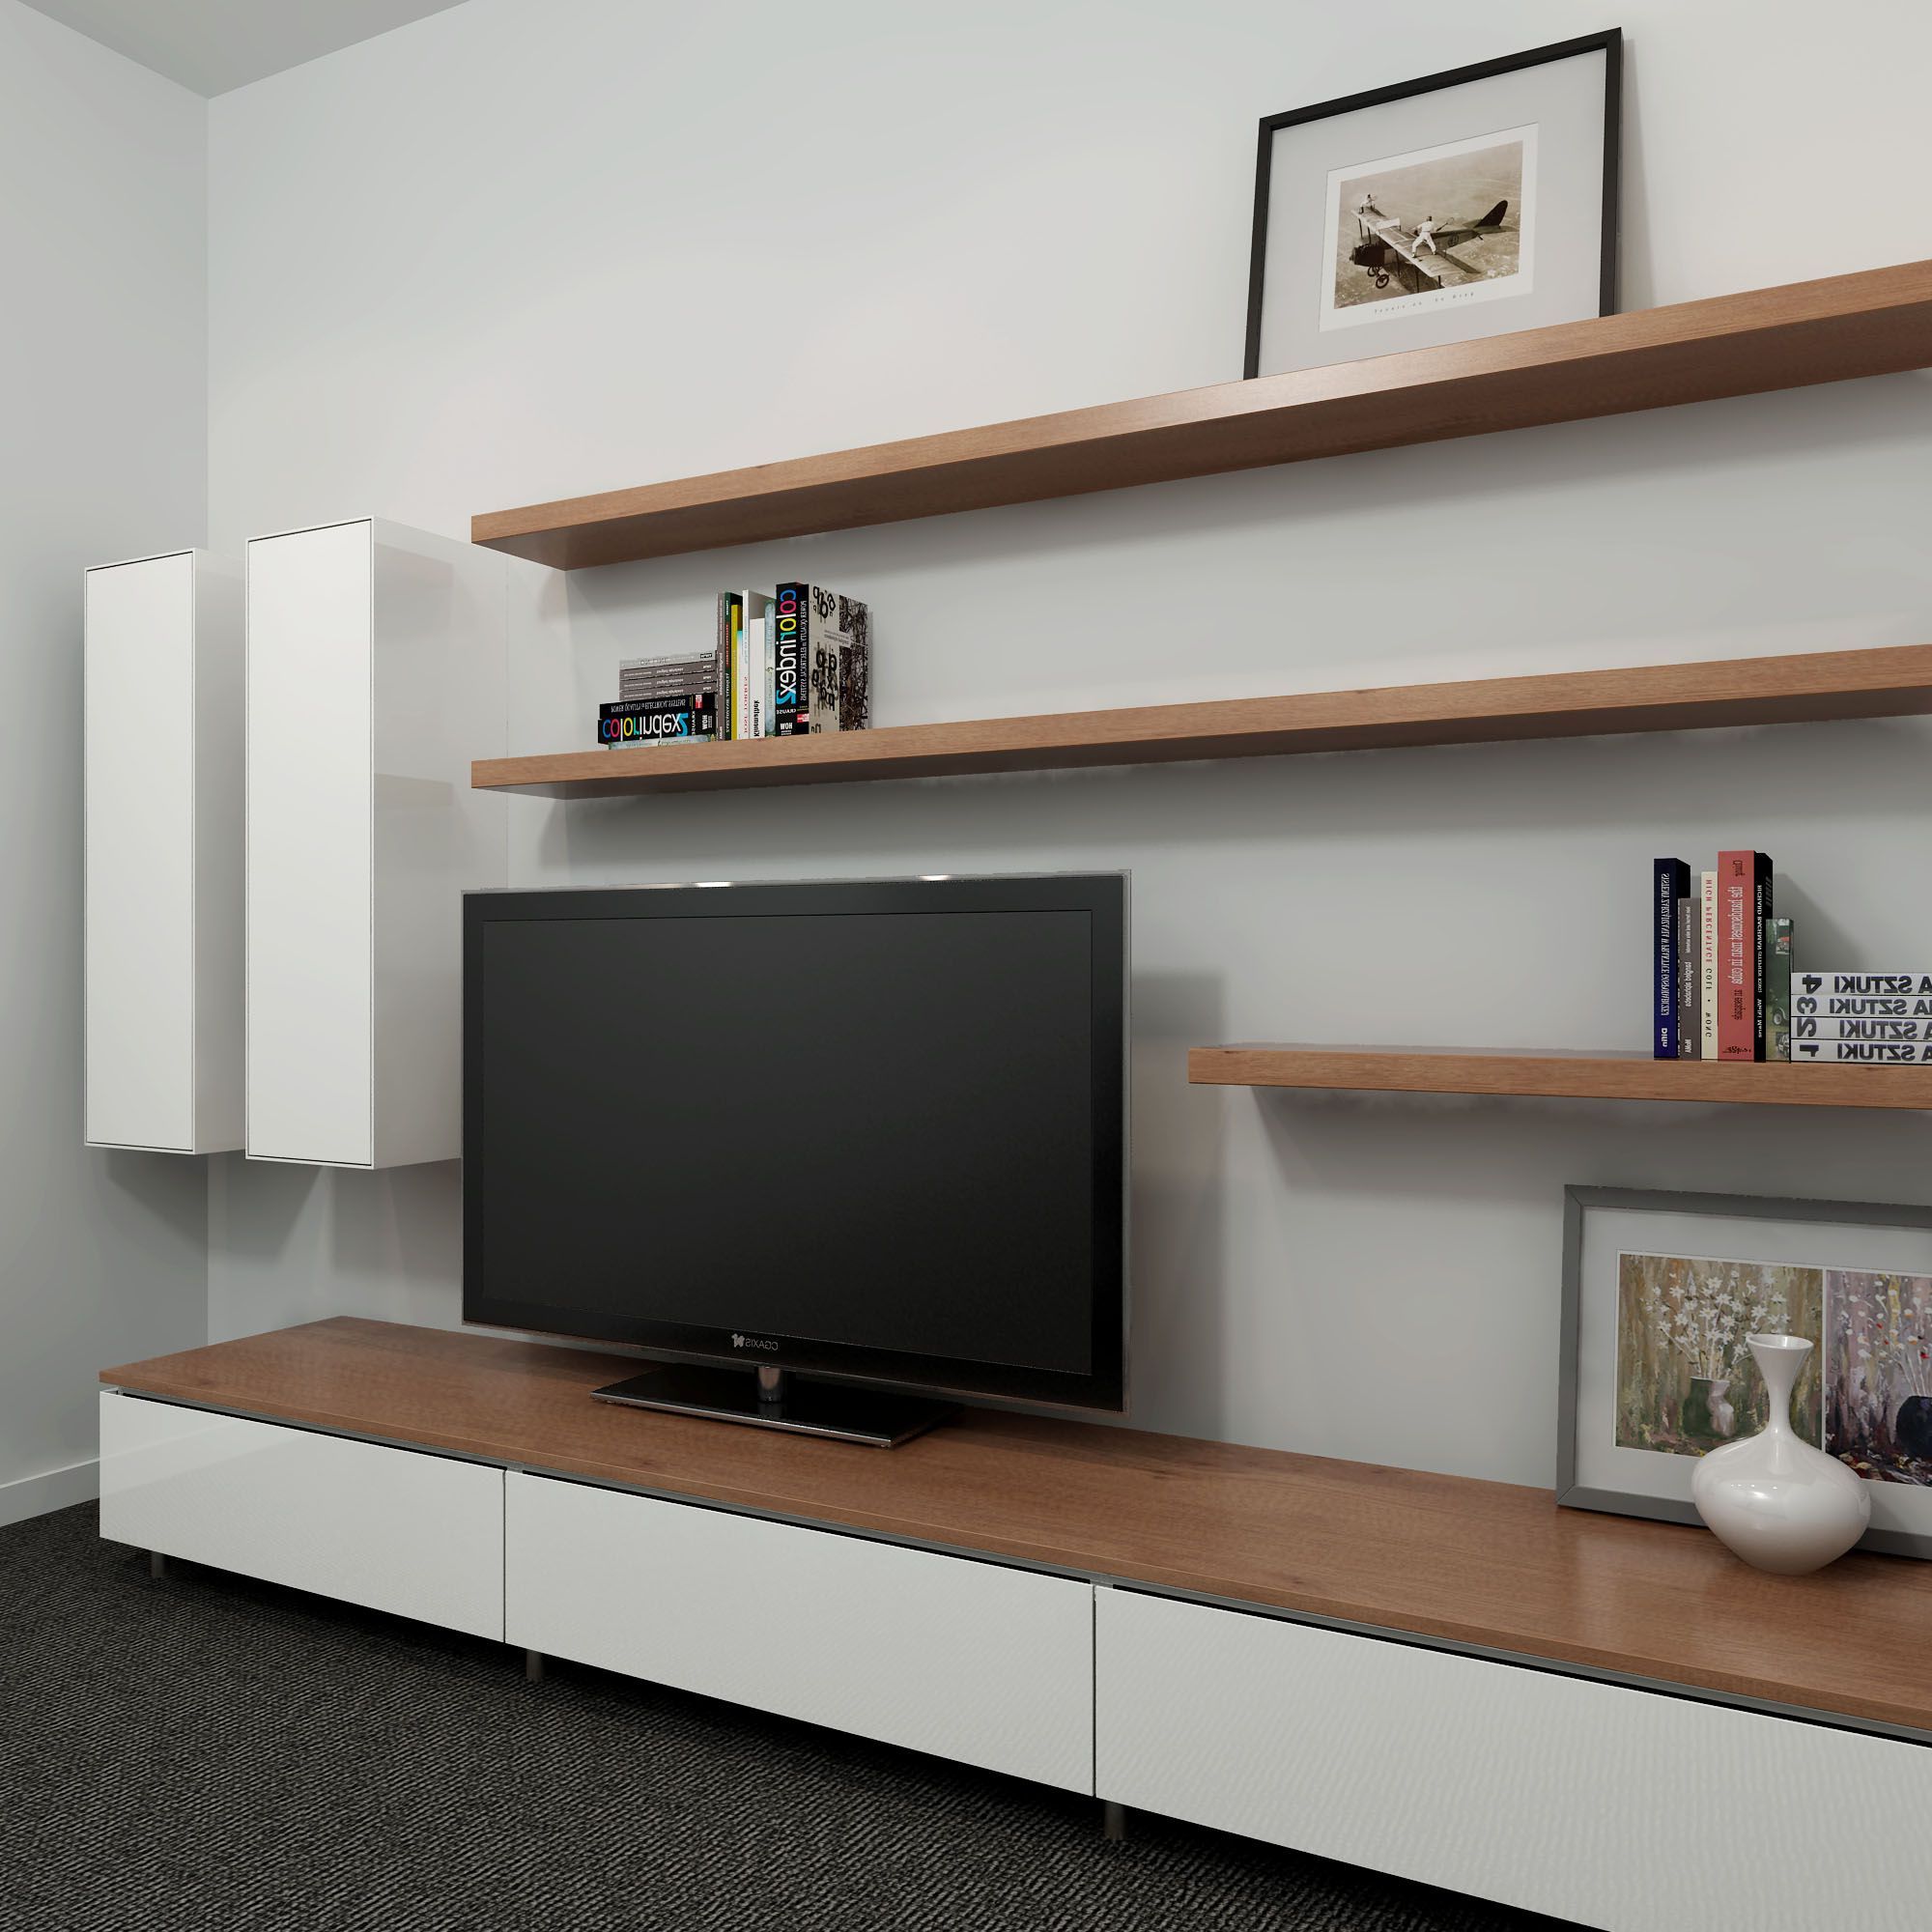 Bookshelf And Tv Stands Within Most Recent 19 Amazing Diy Tv Stand Ideas You Can Build Right Now (View 13 of 20)